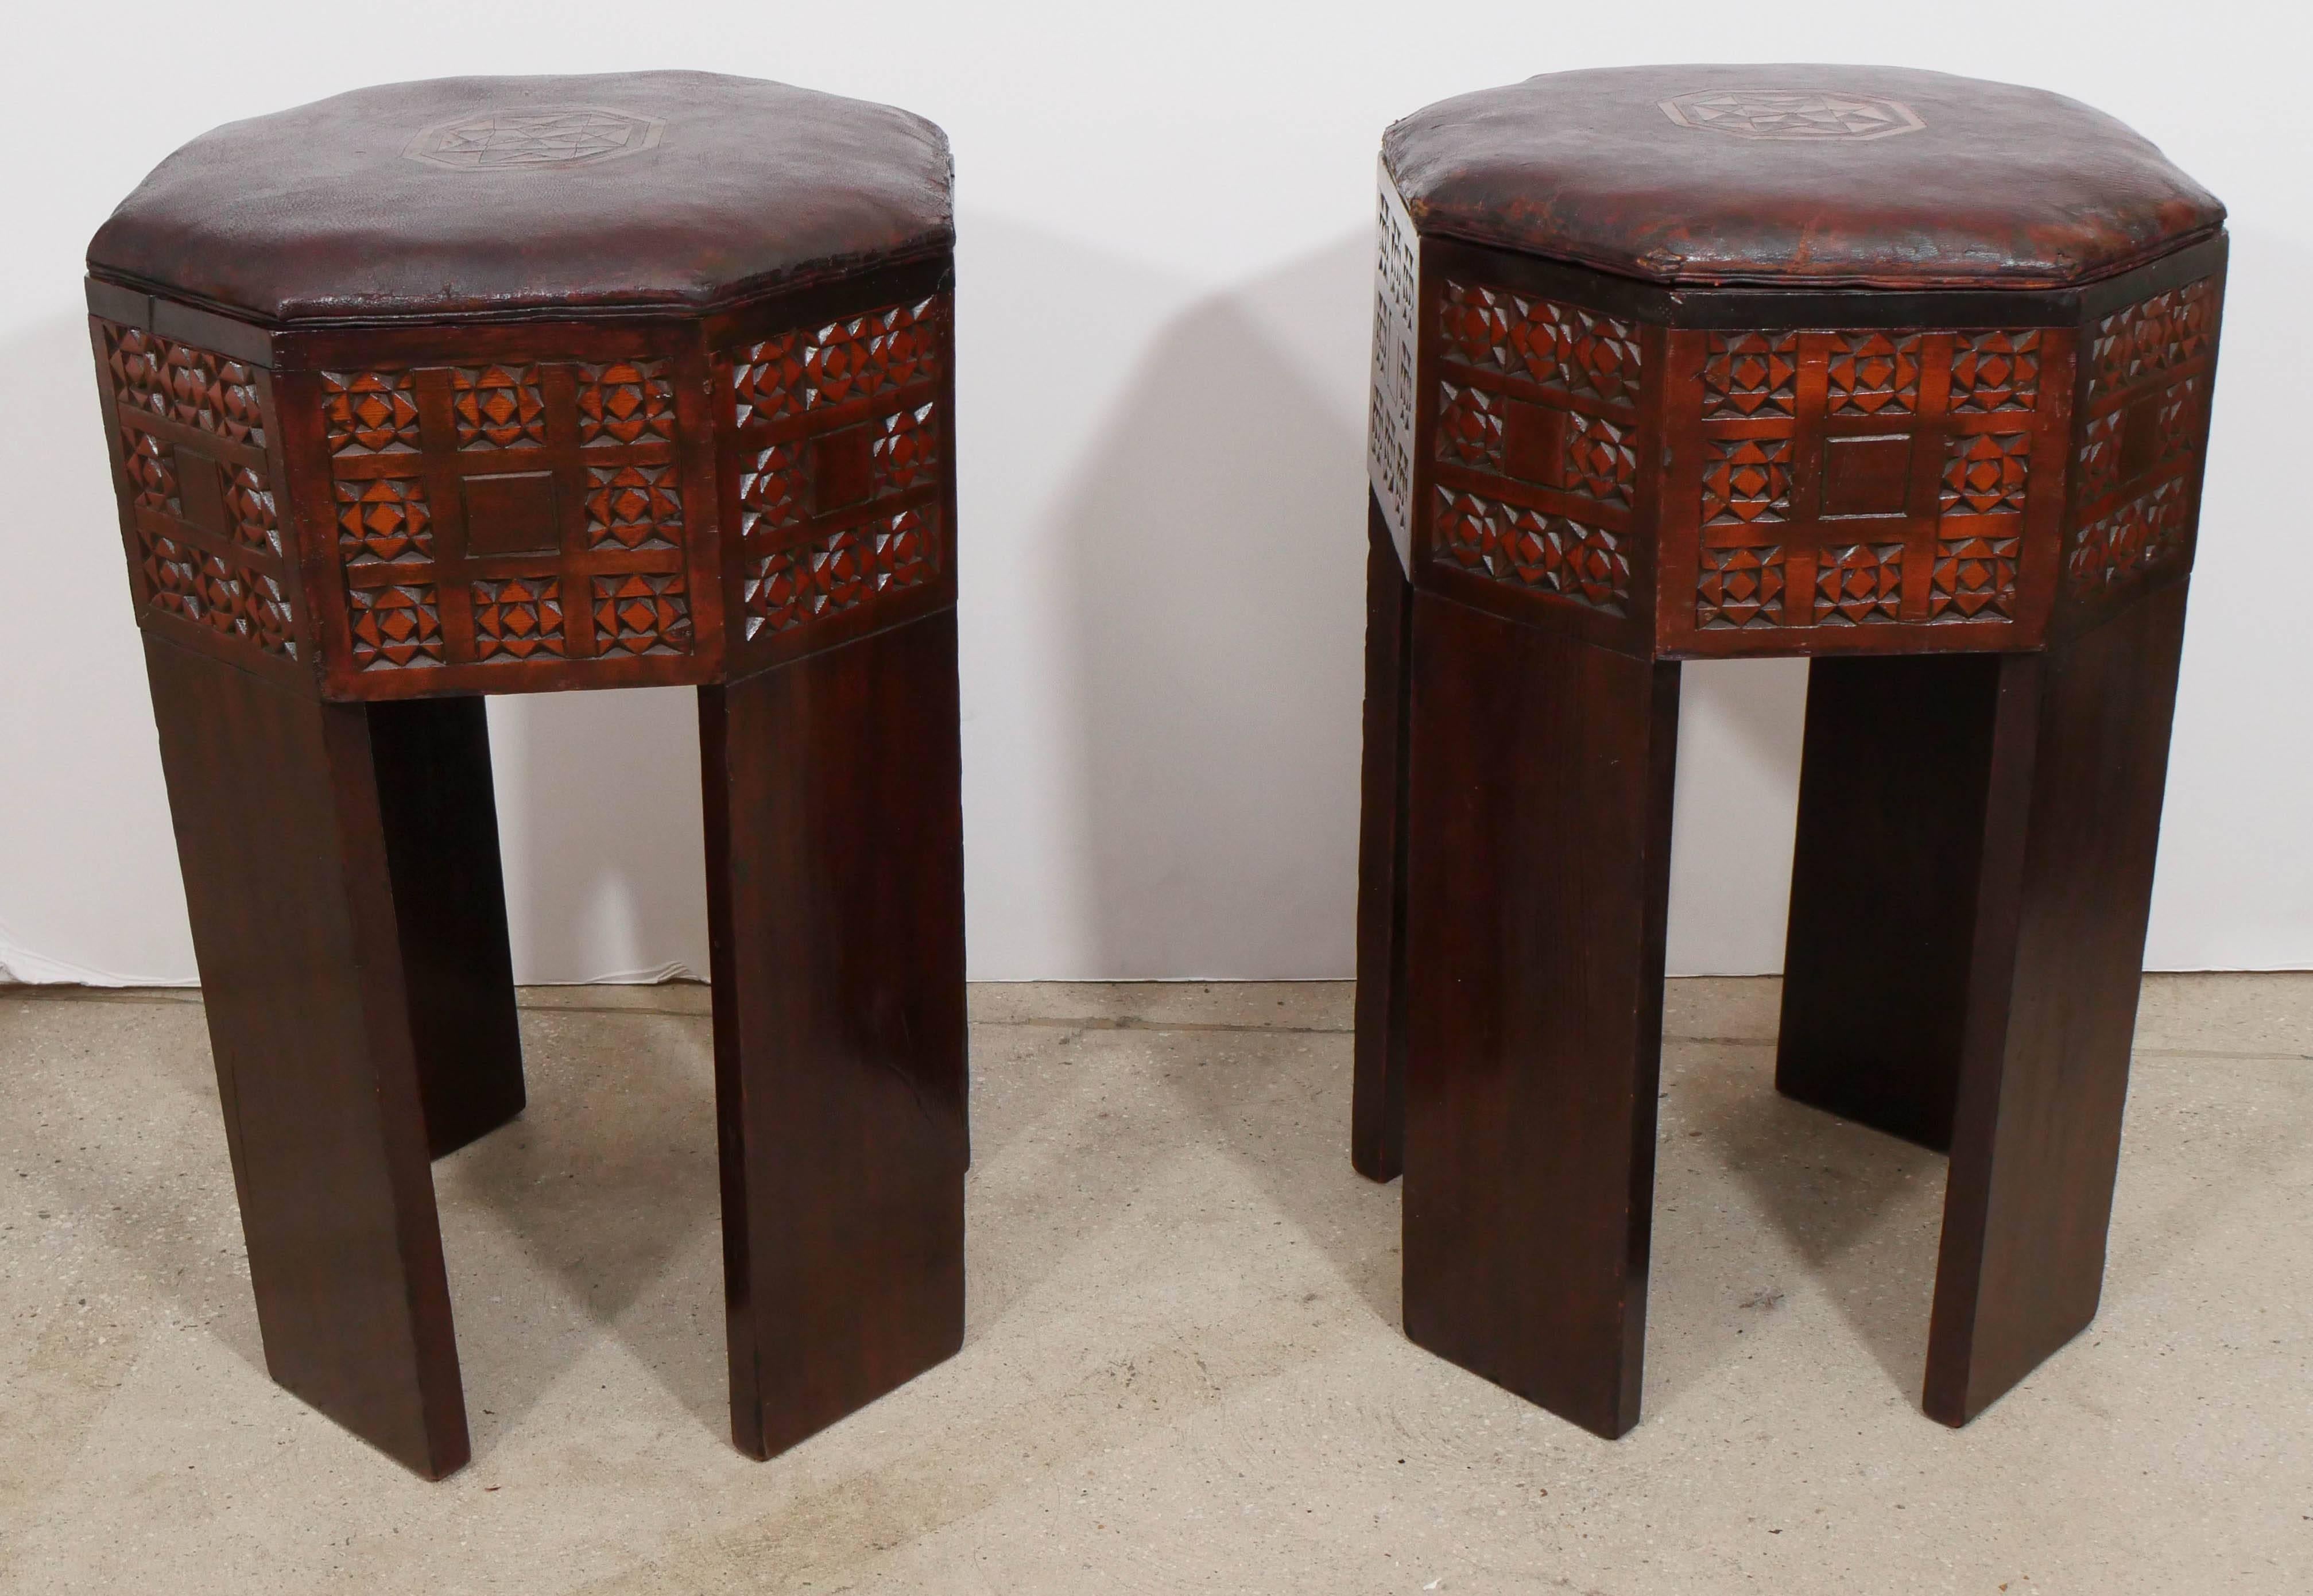 Rare octagonal stools with a leather seat.
These two stools come from Marrakech Home.